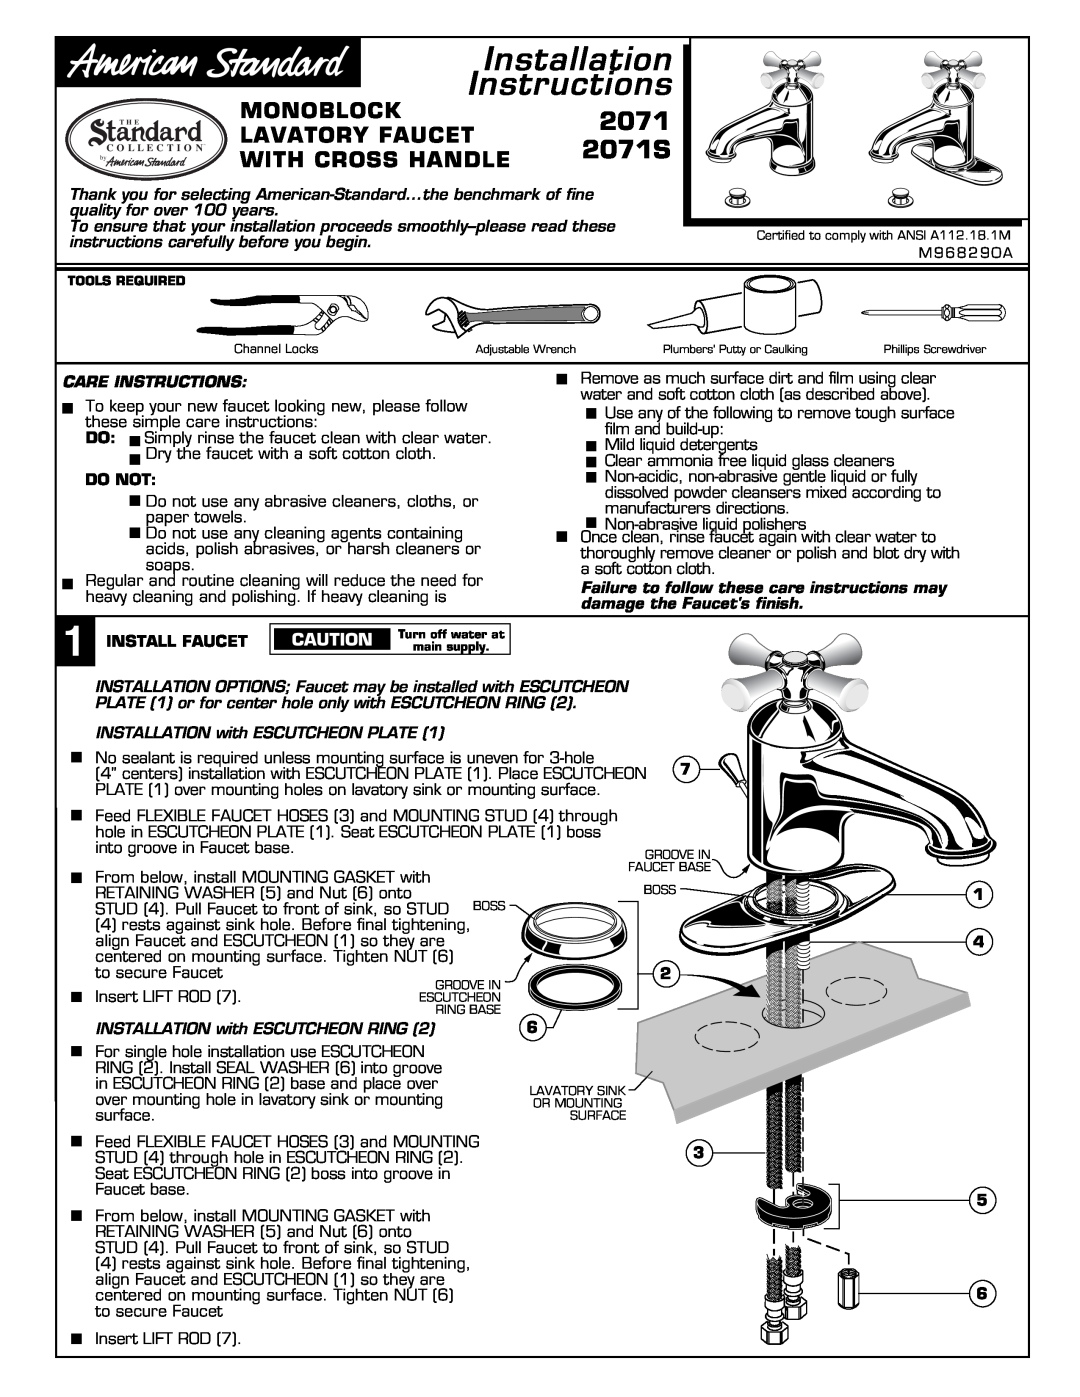 American Standard installation instructions 2071S, Monoblock, Lavatory Faucet, With Cross Handle, Care Instructions 